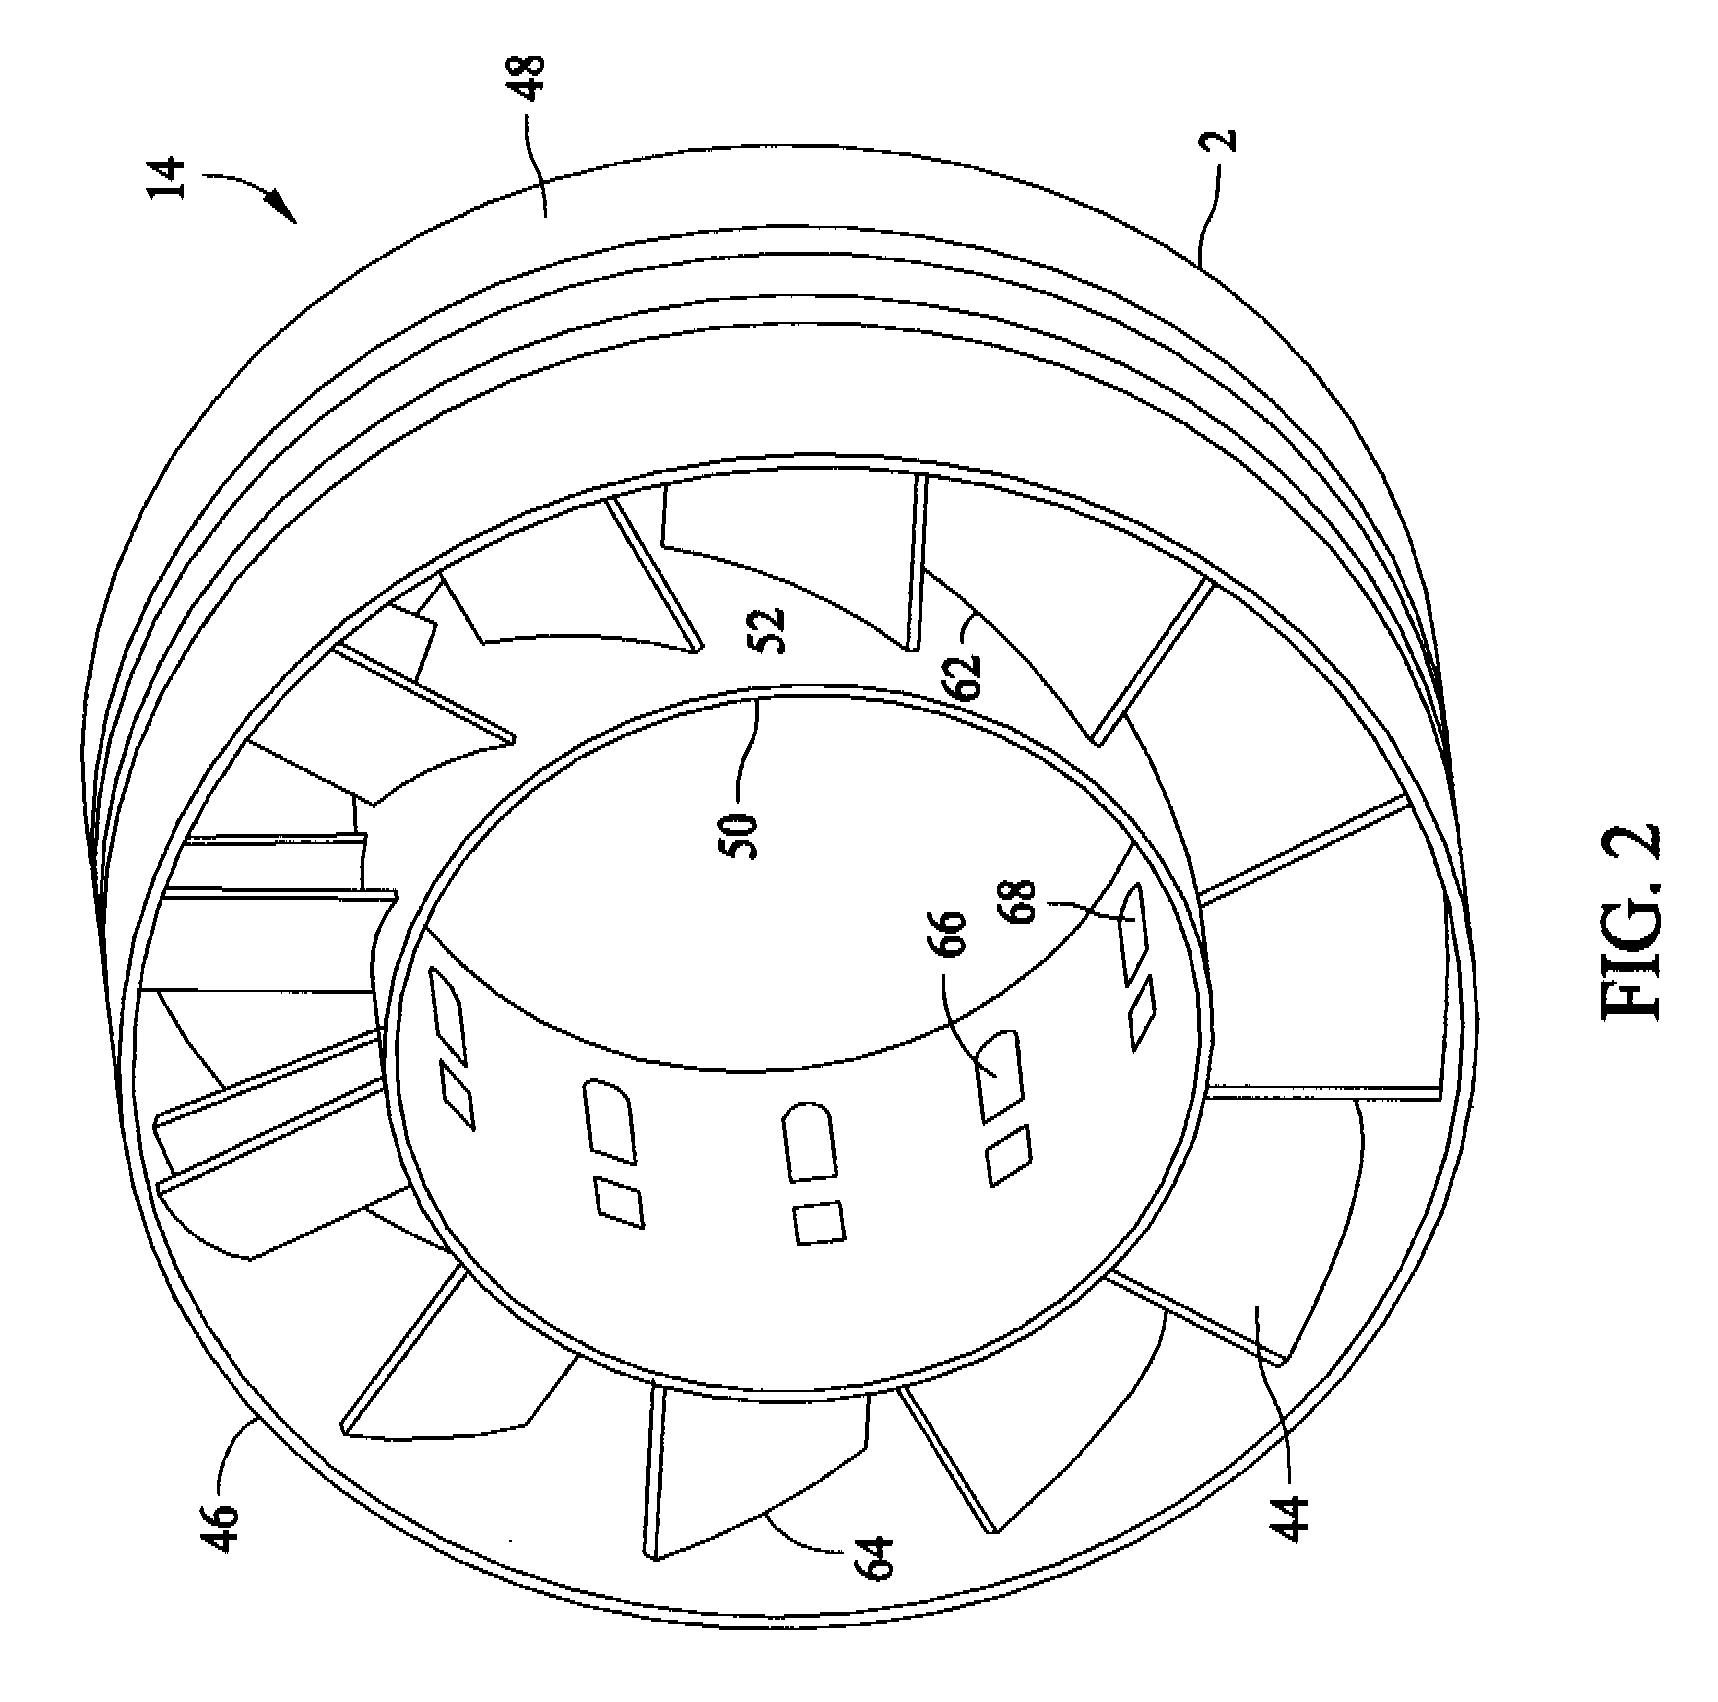 Methods and systems to facilitate operating within flame-holding margin